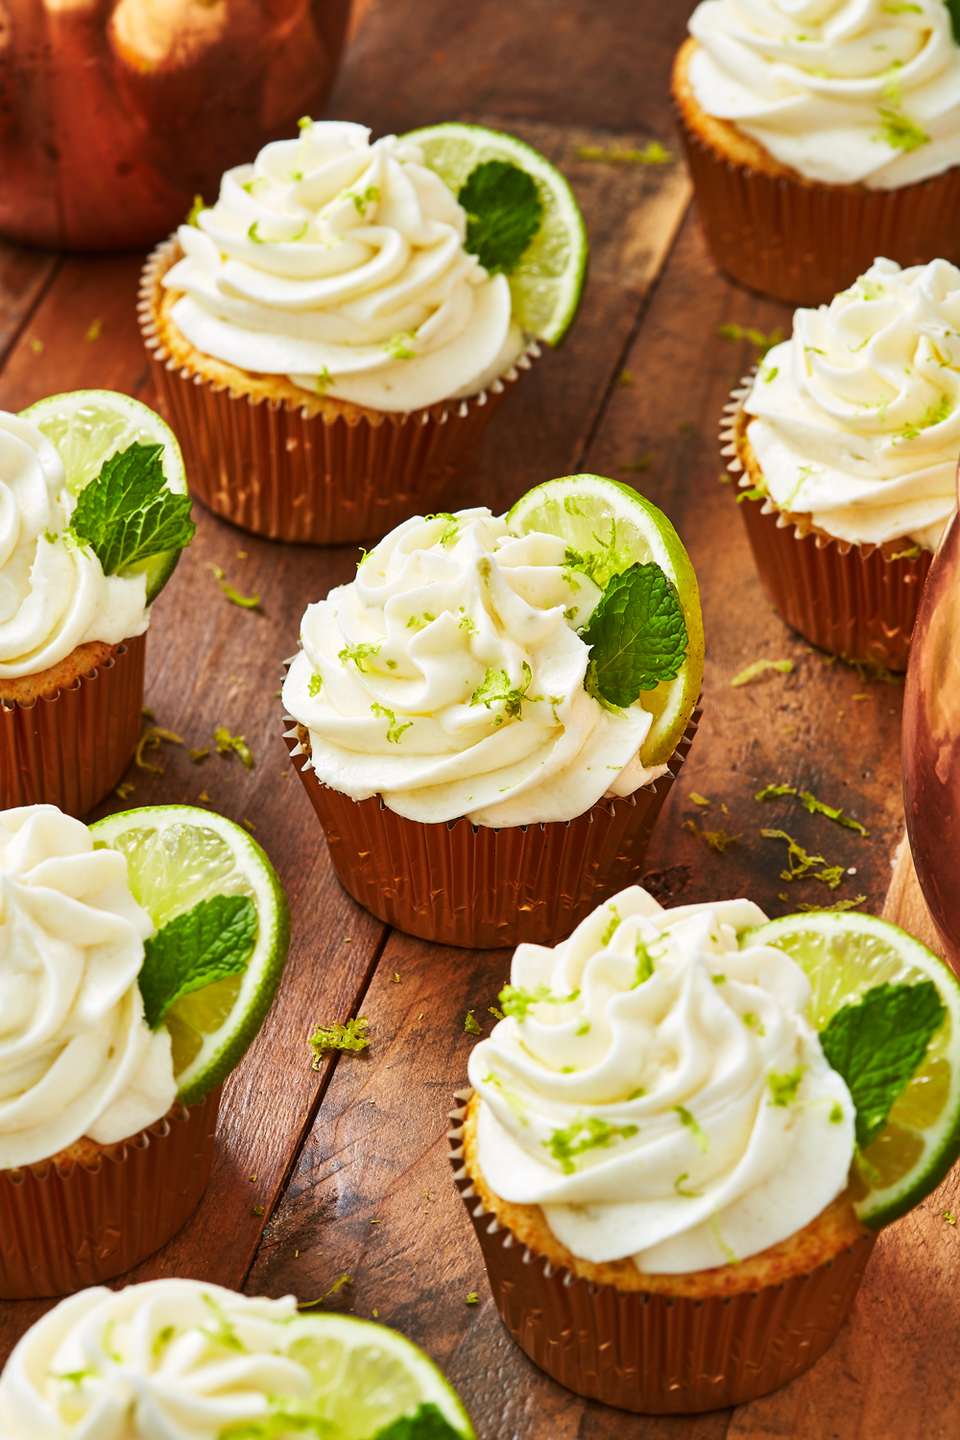 <p>To make these cupcakes really feel like a <a href="https://www.delish.com/cooking/recipe-ideas/recipes/a43535/moscow-mule-recipe/" rel="nofollow noopener" target="_blank" data-ylk="slk:Moscow Mule" class="link rapid-noclick-resp">Moscow Mule</a> in dessert form, we added ginger beer to the cupcake batter. </p><p>Get the recipe from <a href="https://www.delish.com/cooking/recipe-ideas/recipes/a55910/moscow-mule-cupcakes-recipe/" rel="nofollow noopener" target="_blank" data-ylk="slk:Delish" class="link rapid-noclick-resp">Delish</a>.</p>